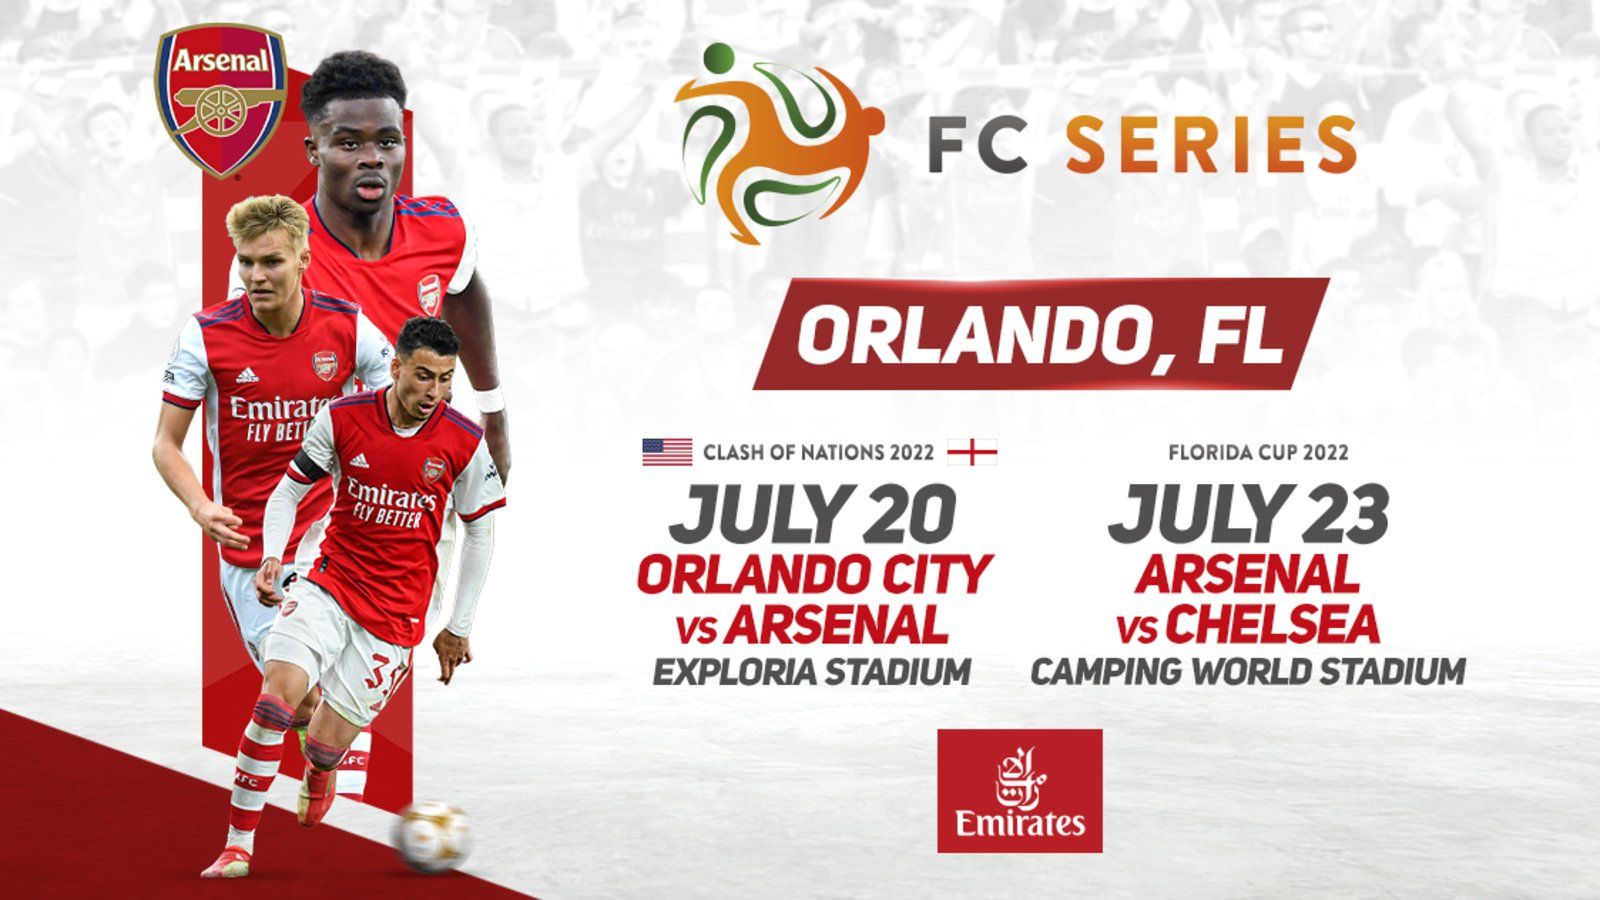 Arsenal to head to the US to compete in FC Series, News